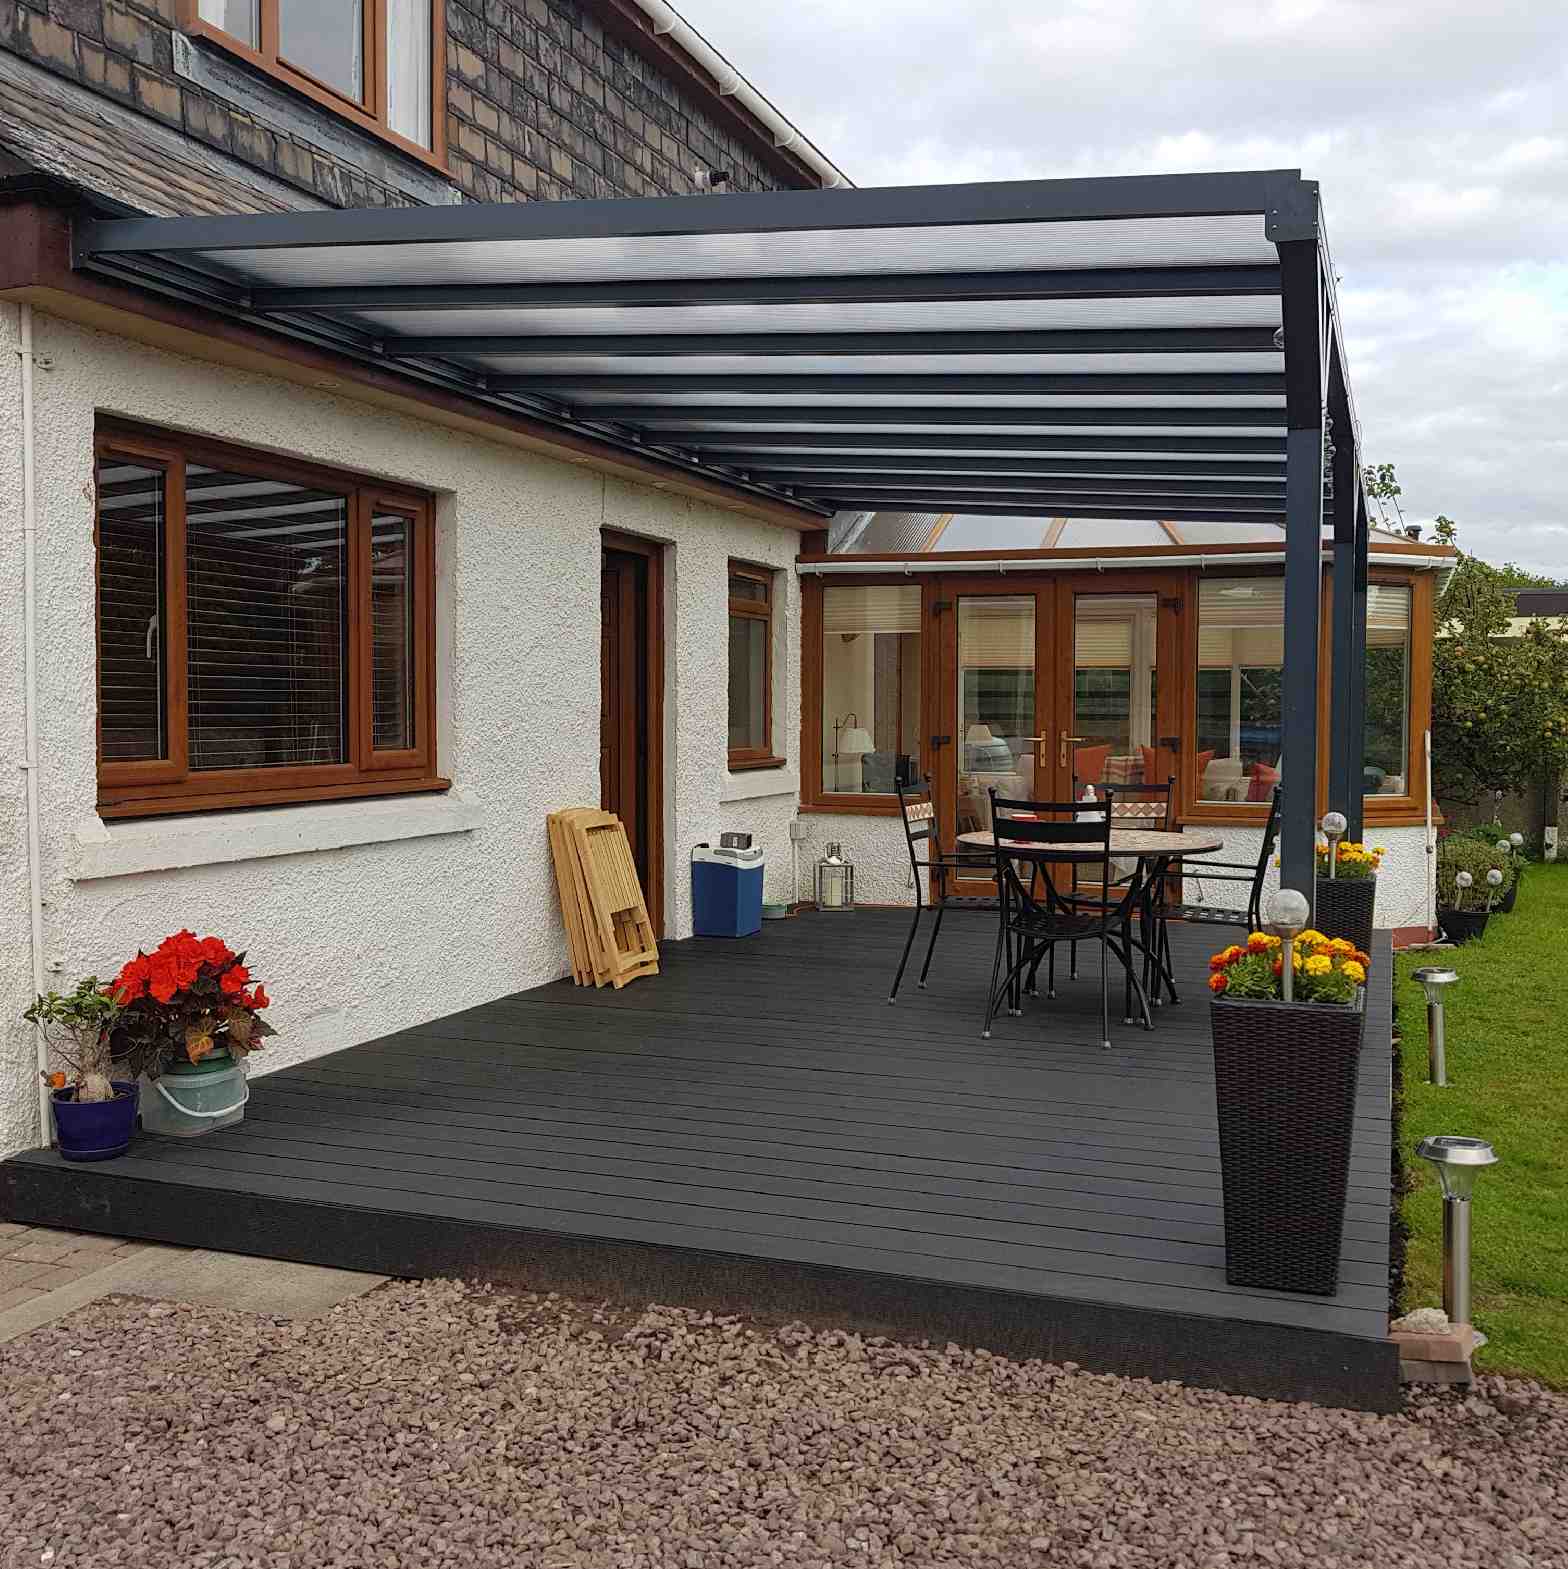 Buy Omega Verandah, Anthracite Grey, 16mm Polycarbonate Glazing - 6.0m (W) x 4.0m (P), (3) Supporting Posts online today